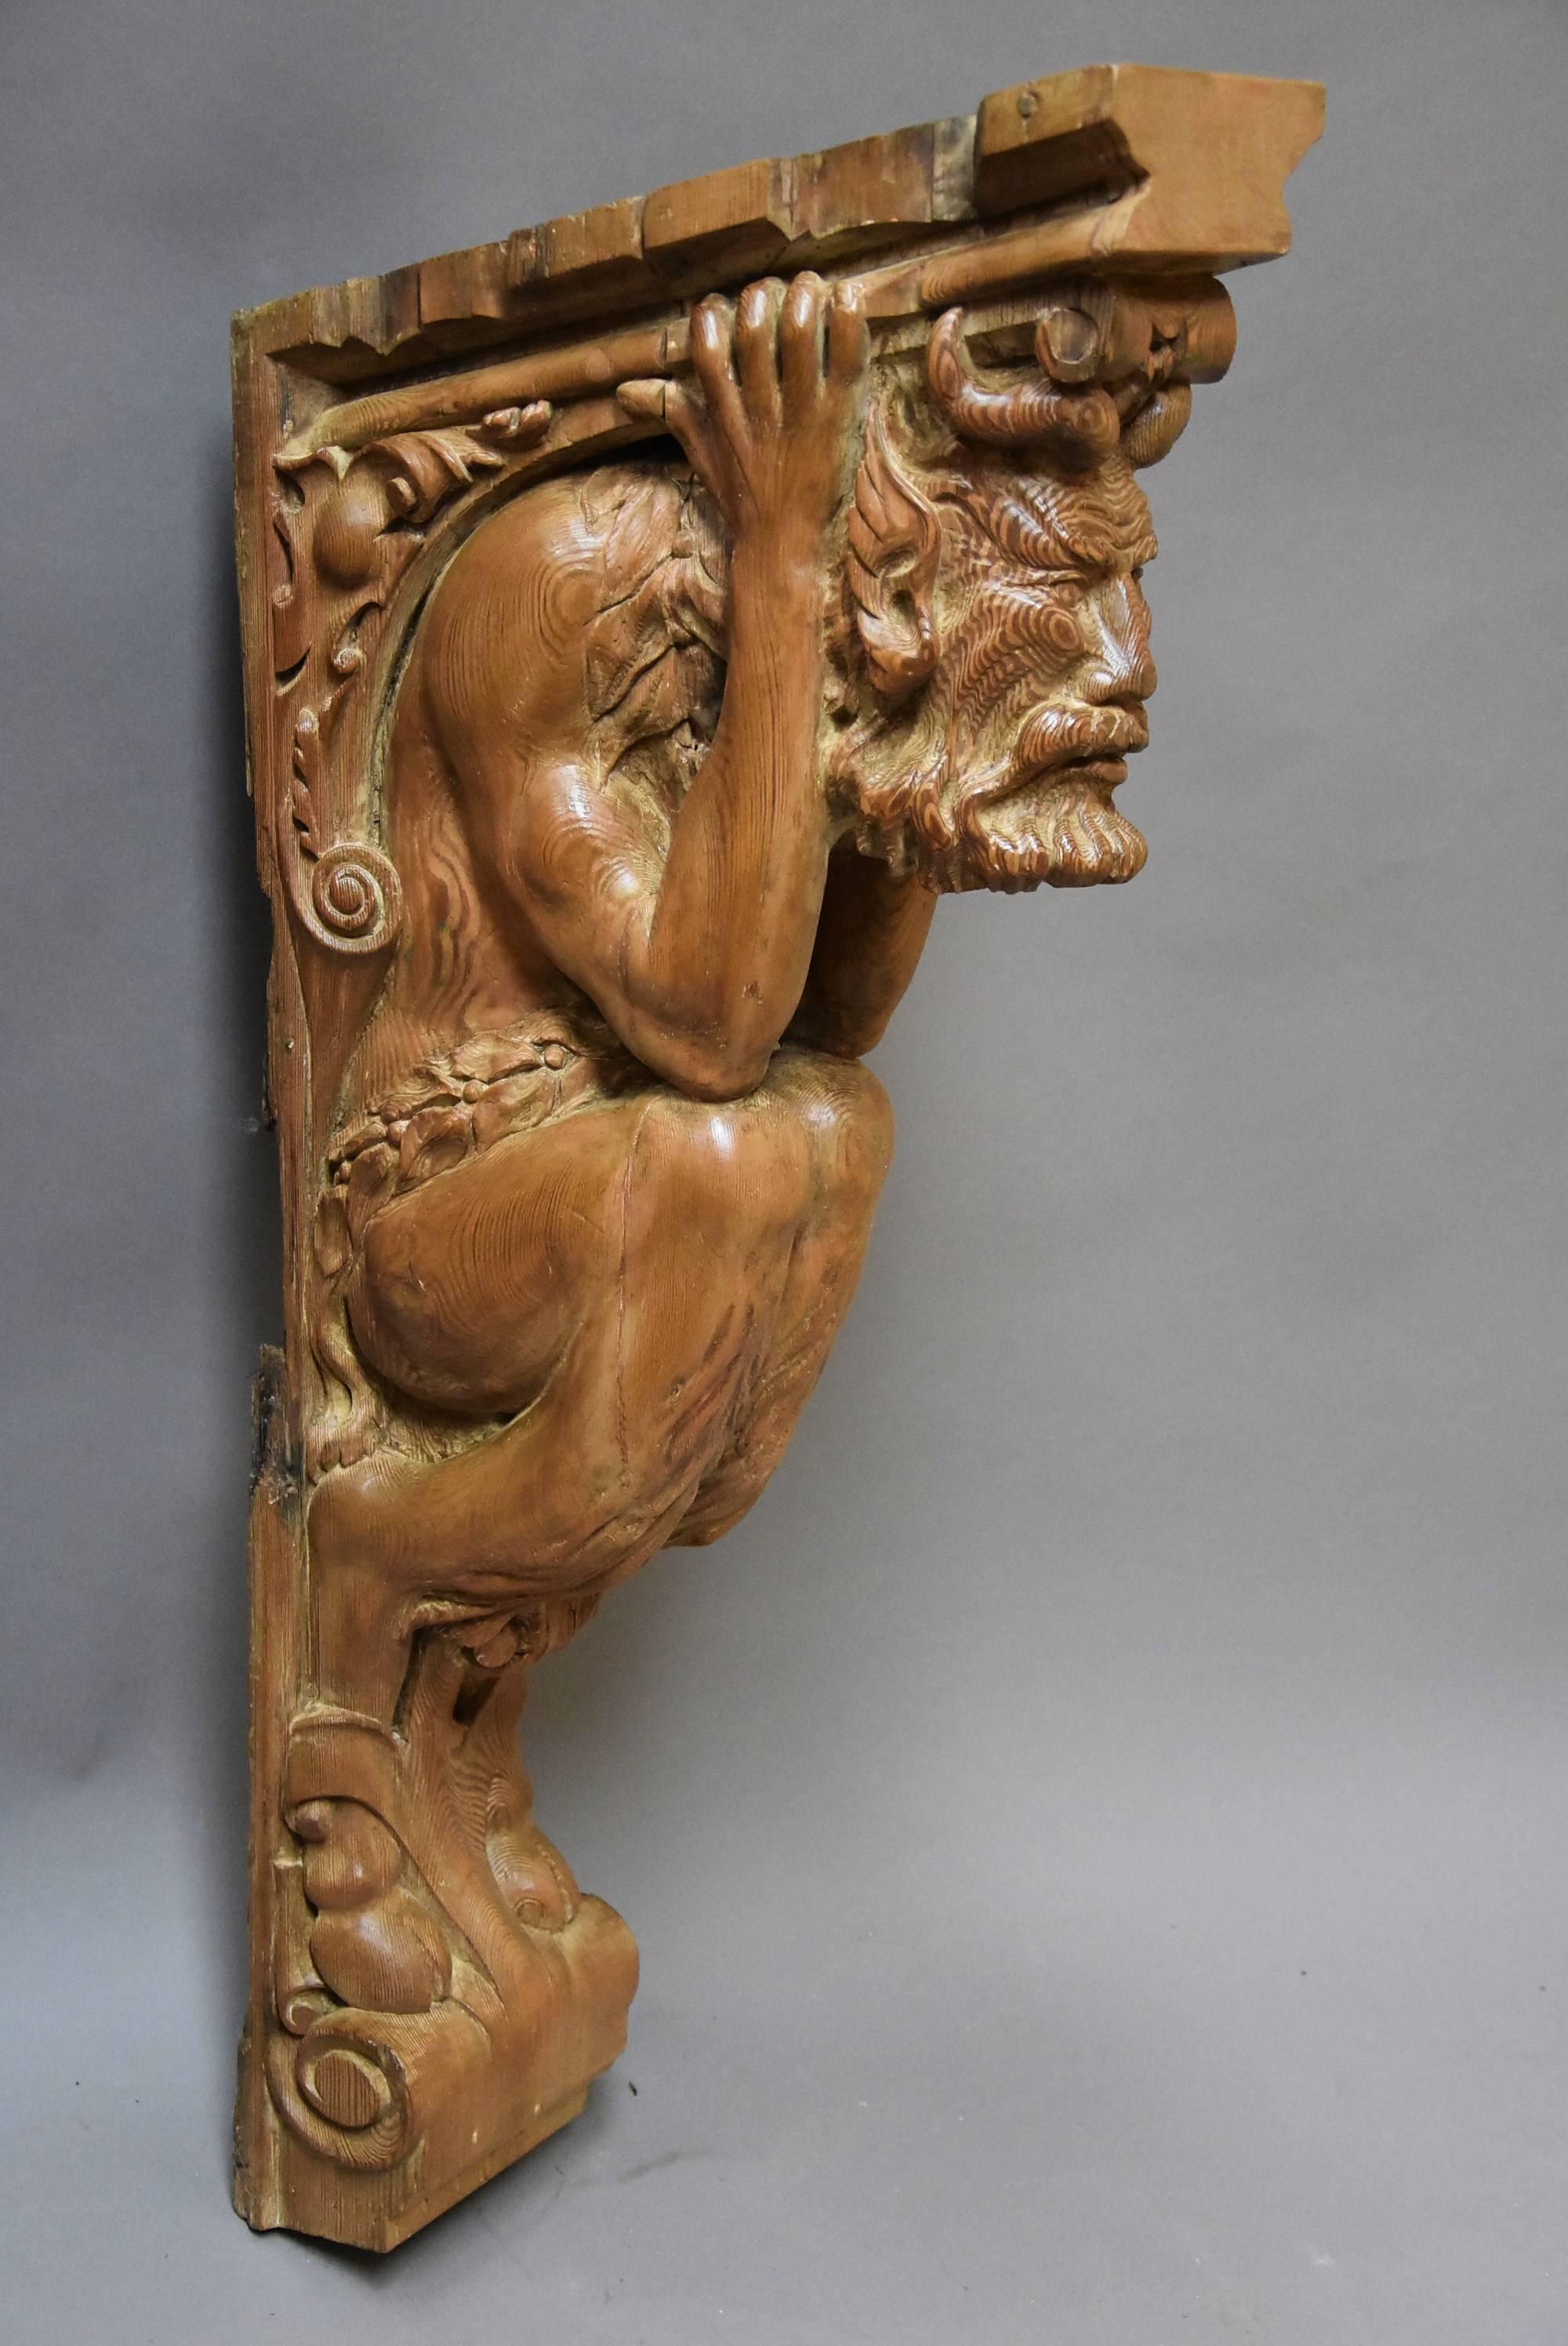 A highly decorative large superbly carved Continental large pine bracket in the form of a satyr, possibly Italian.

This imposing carving consists of a satyr holding onto the scrolling bracket above him, this bracket supporting the satyr, his